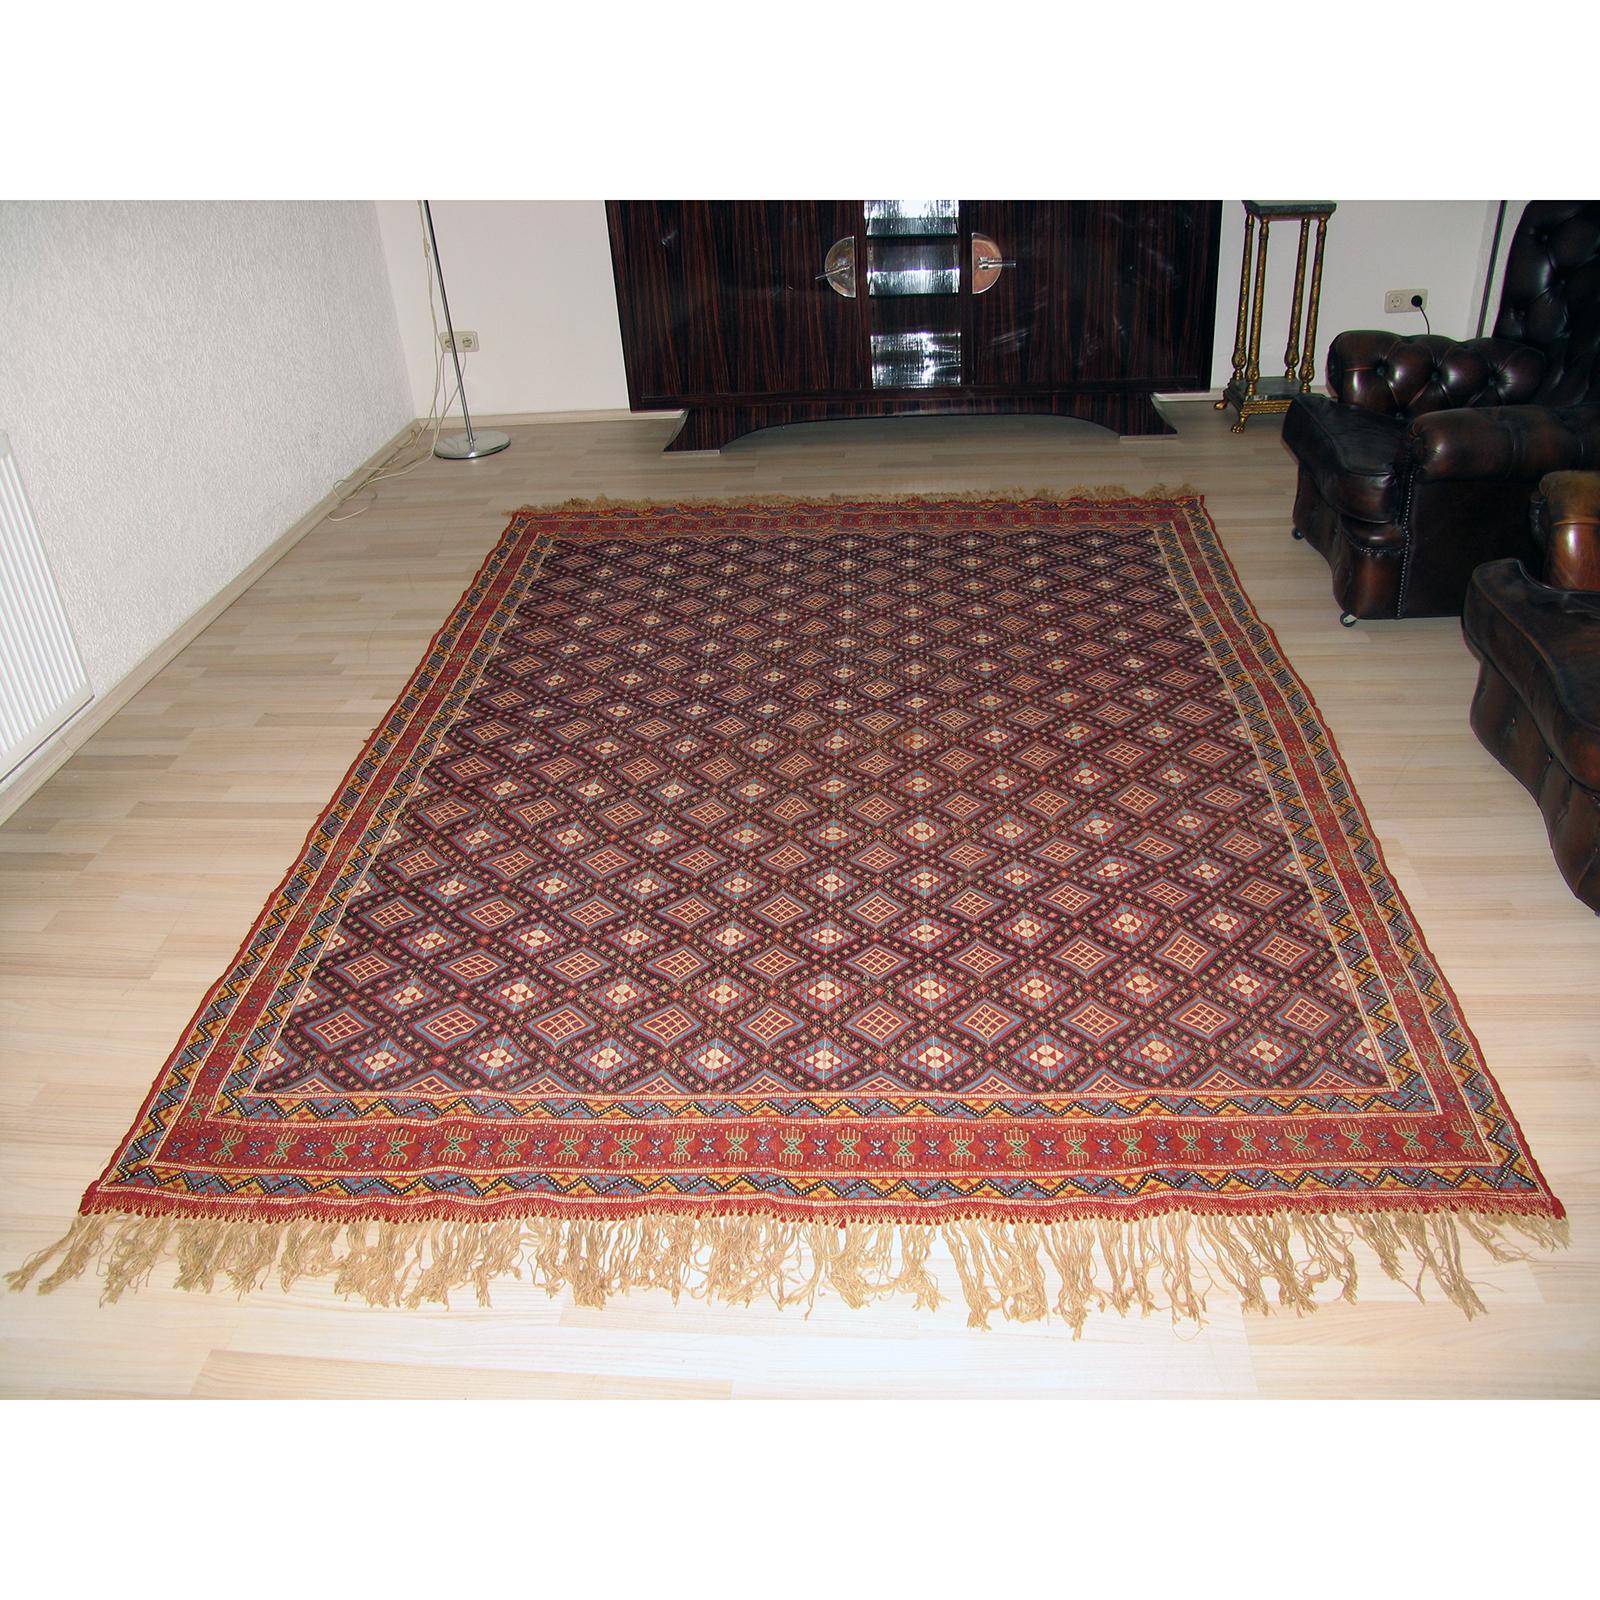 Wonderful caucasian flat weaved rug, with a beautiful geometric design. Wool. Very good used condition, with minimal signs of use, some wear to the fringes. This carpet has been professionally cleaned, ready for a new home.
Dimensions: 210 x 300 cm